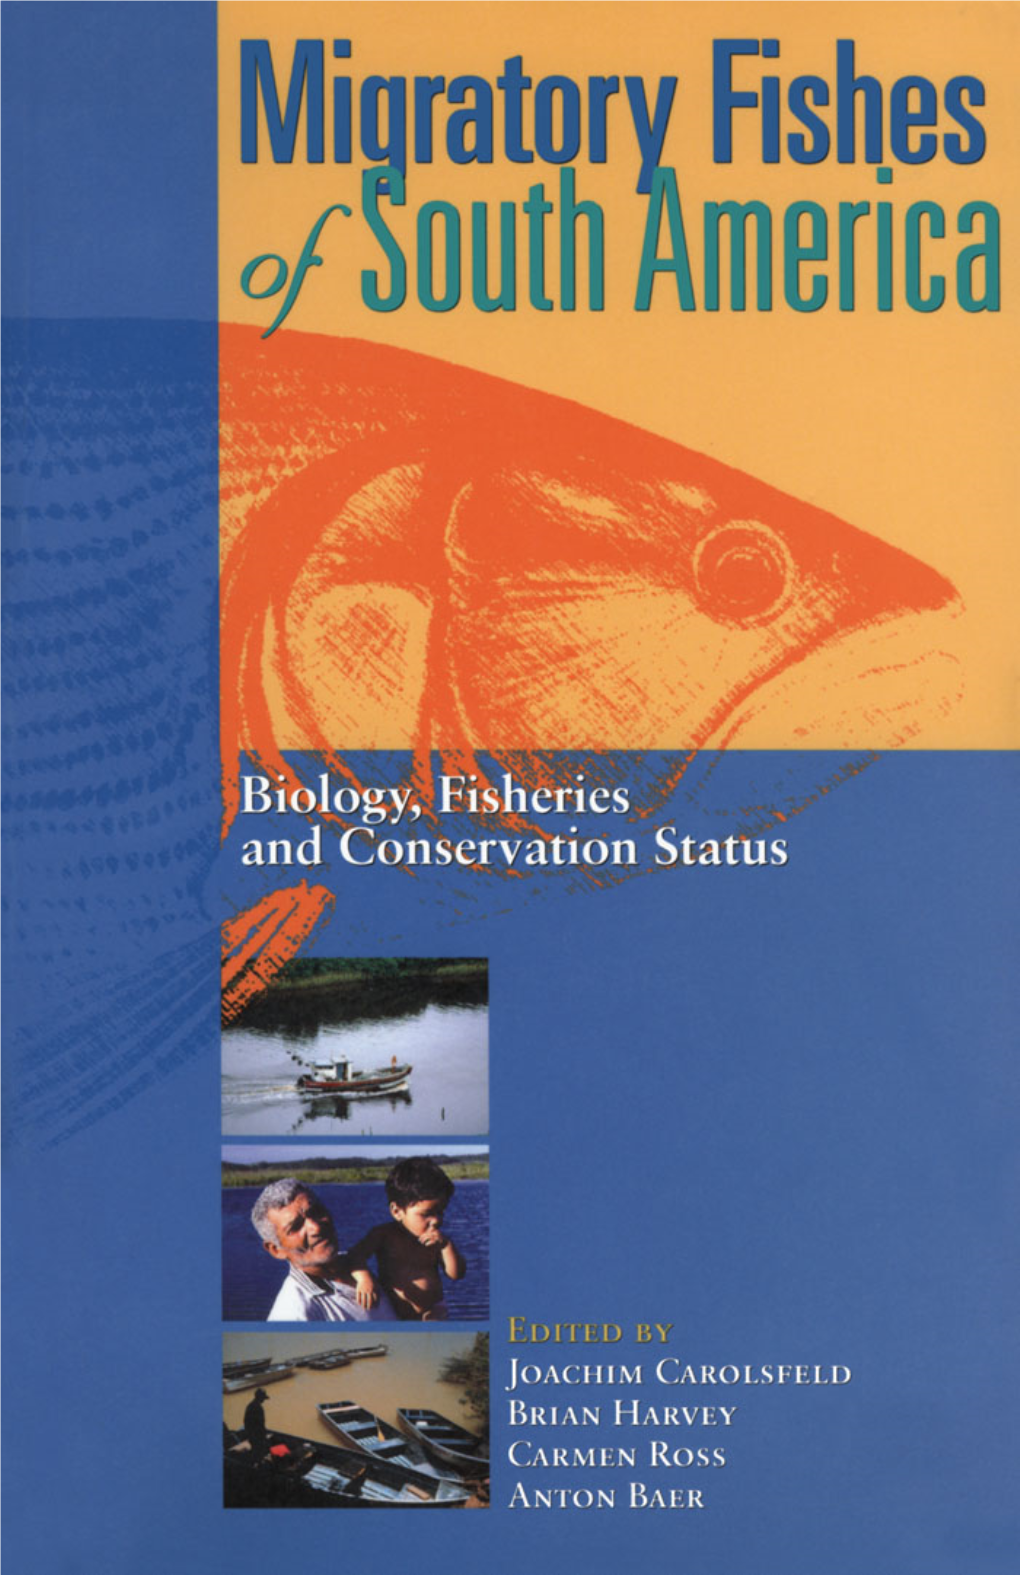 MITIGATION Fisheries Legislation on the Brazilian Section of the River a Decree Published Annually by IBAMA Prohibits Fishing During the Spawning Season